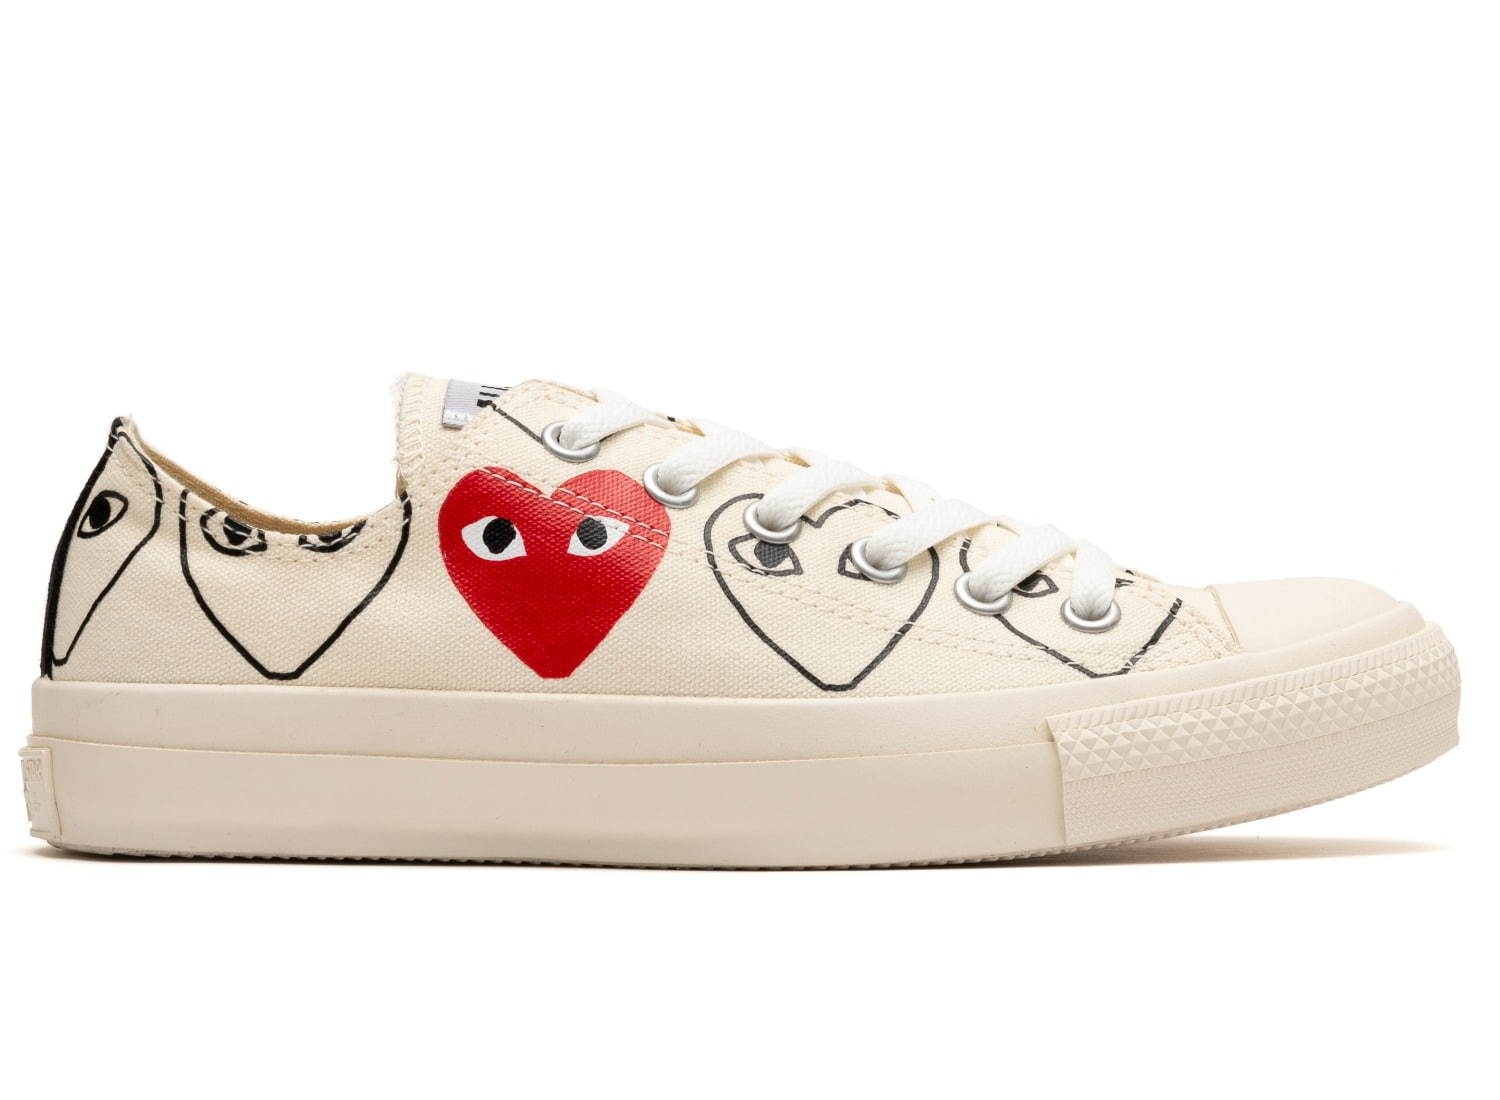 Comme des Garçons PLAY x Converse Chuck 70 Release Date and Pricing